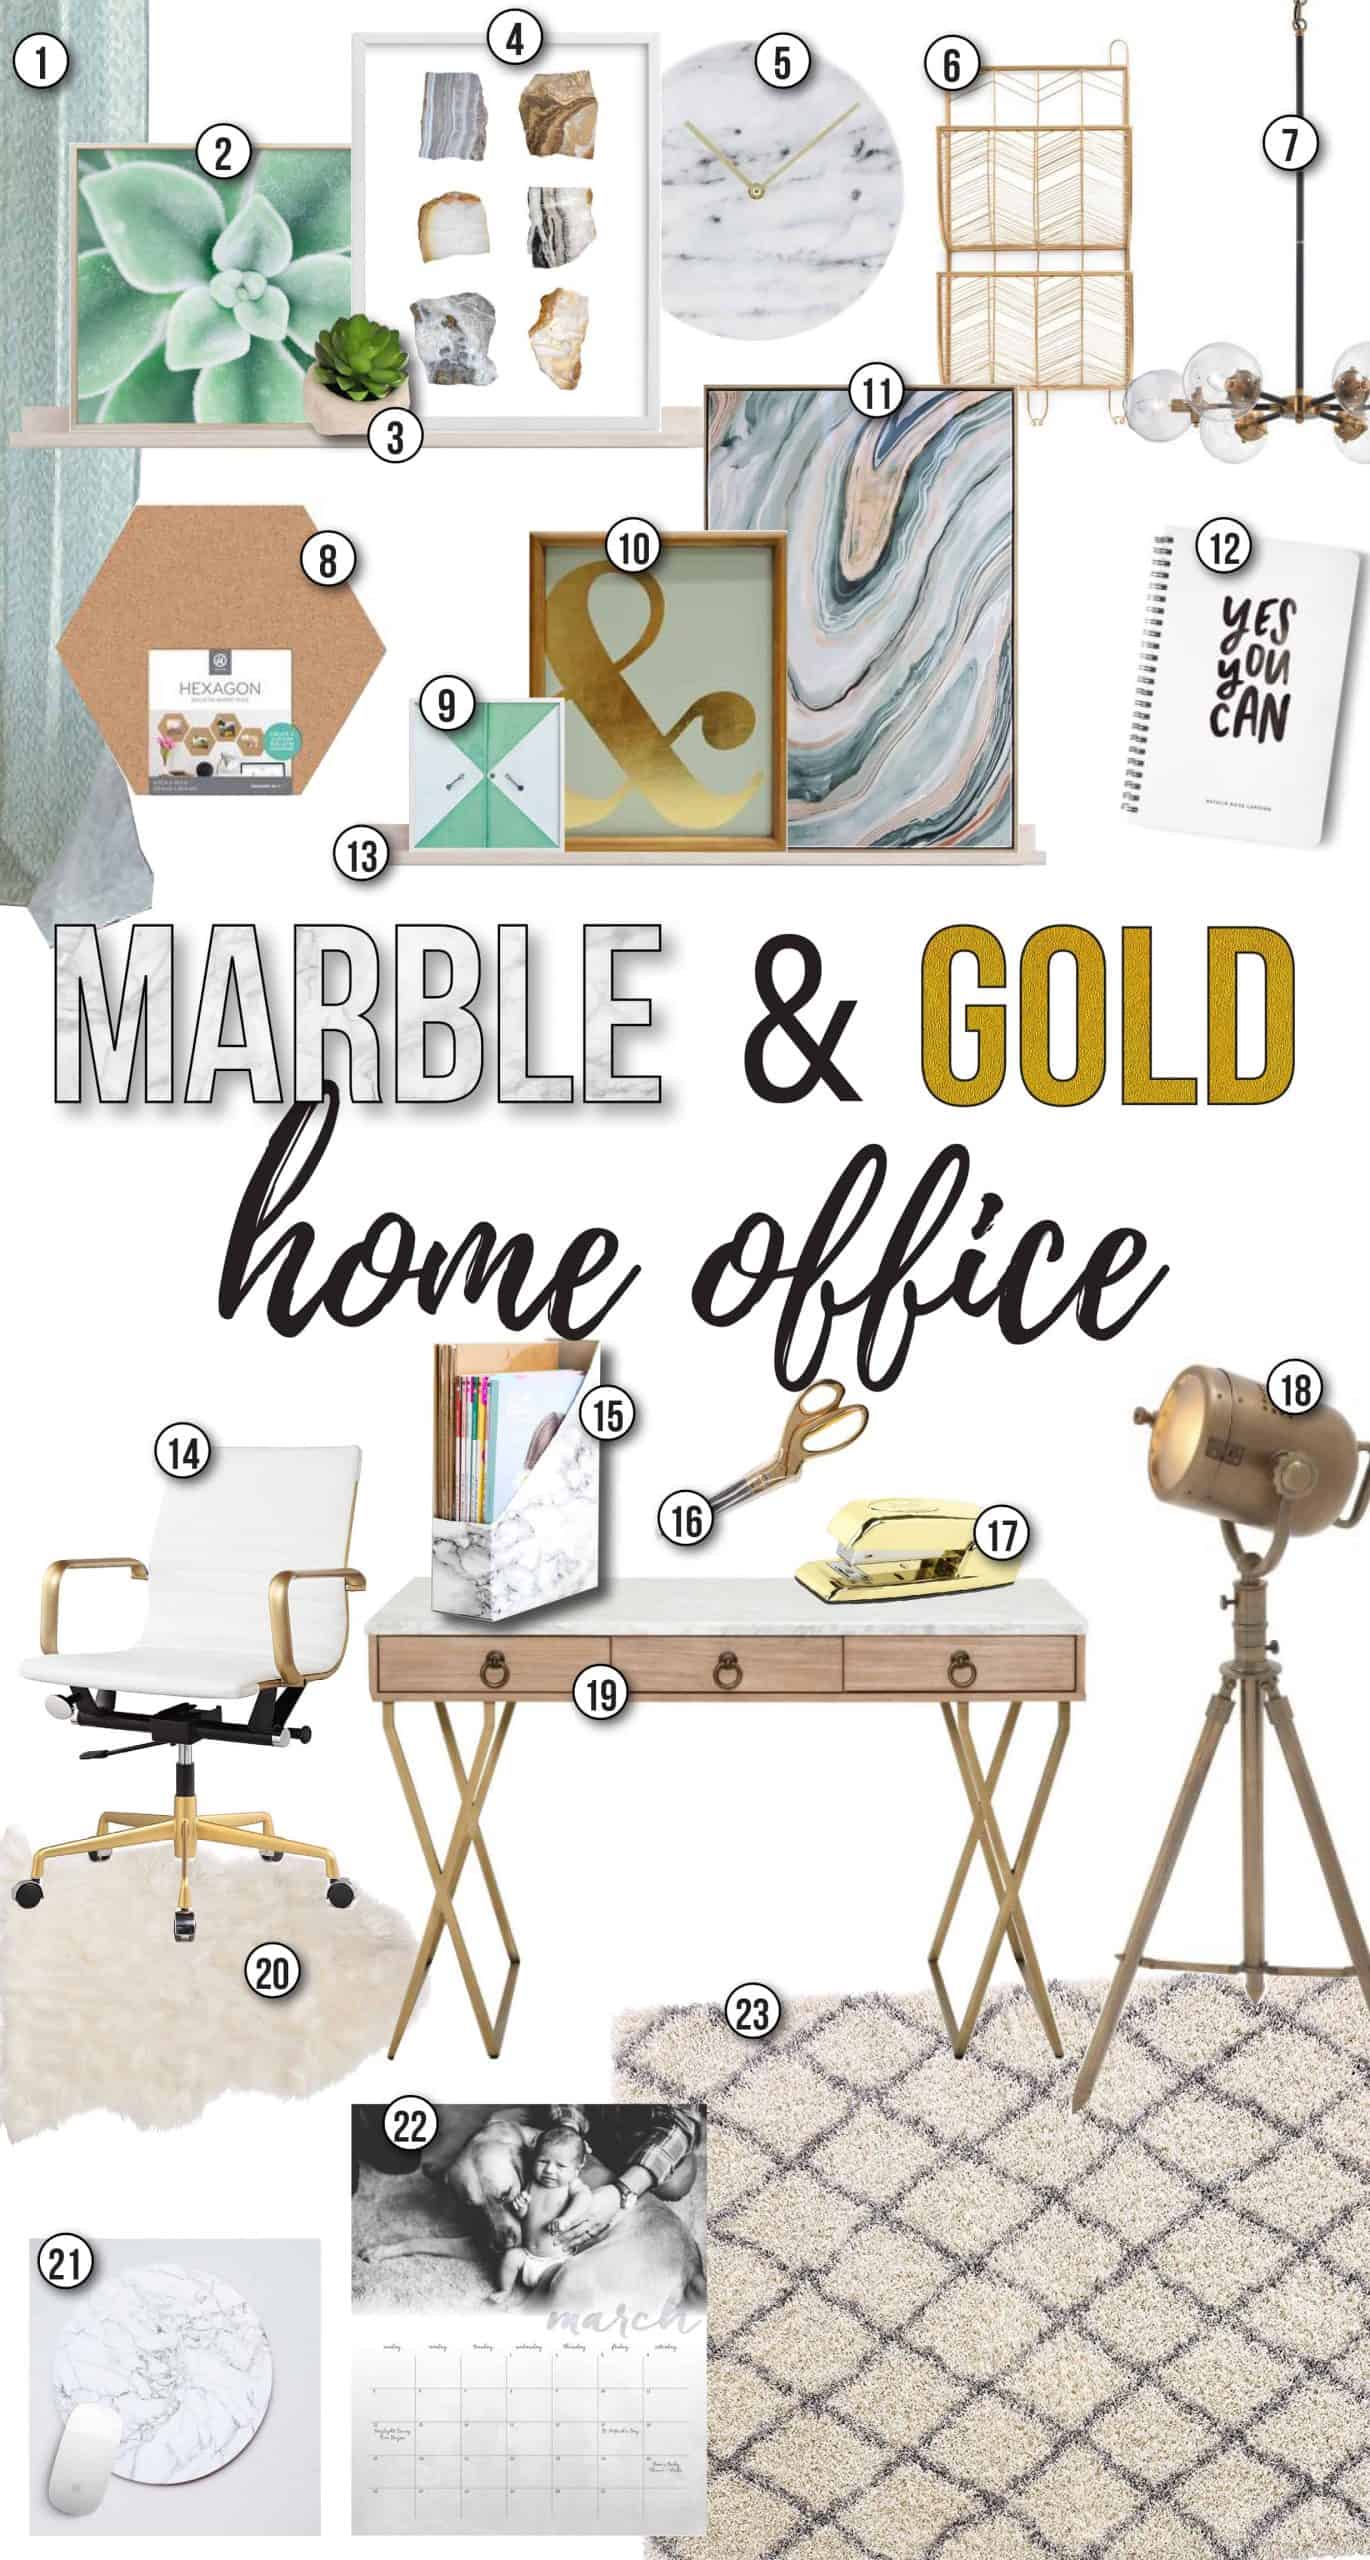 Marble & Gold Office | Home Office | Modern Office Design | Marble & Gold Office Inspiration | Office Design Board | Office Inspo | Home Office Design Ideas | Mint Green Office Ideas | Carrera Marble | Ways to incorporate marble into design | DIY Marble Ideas | Glam Office Design | Chic Office | Marble Chic Office | Agate Design | Geometric Design in Office | Marble Desk | Gold Office Supplies | White and Gold Office Chair